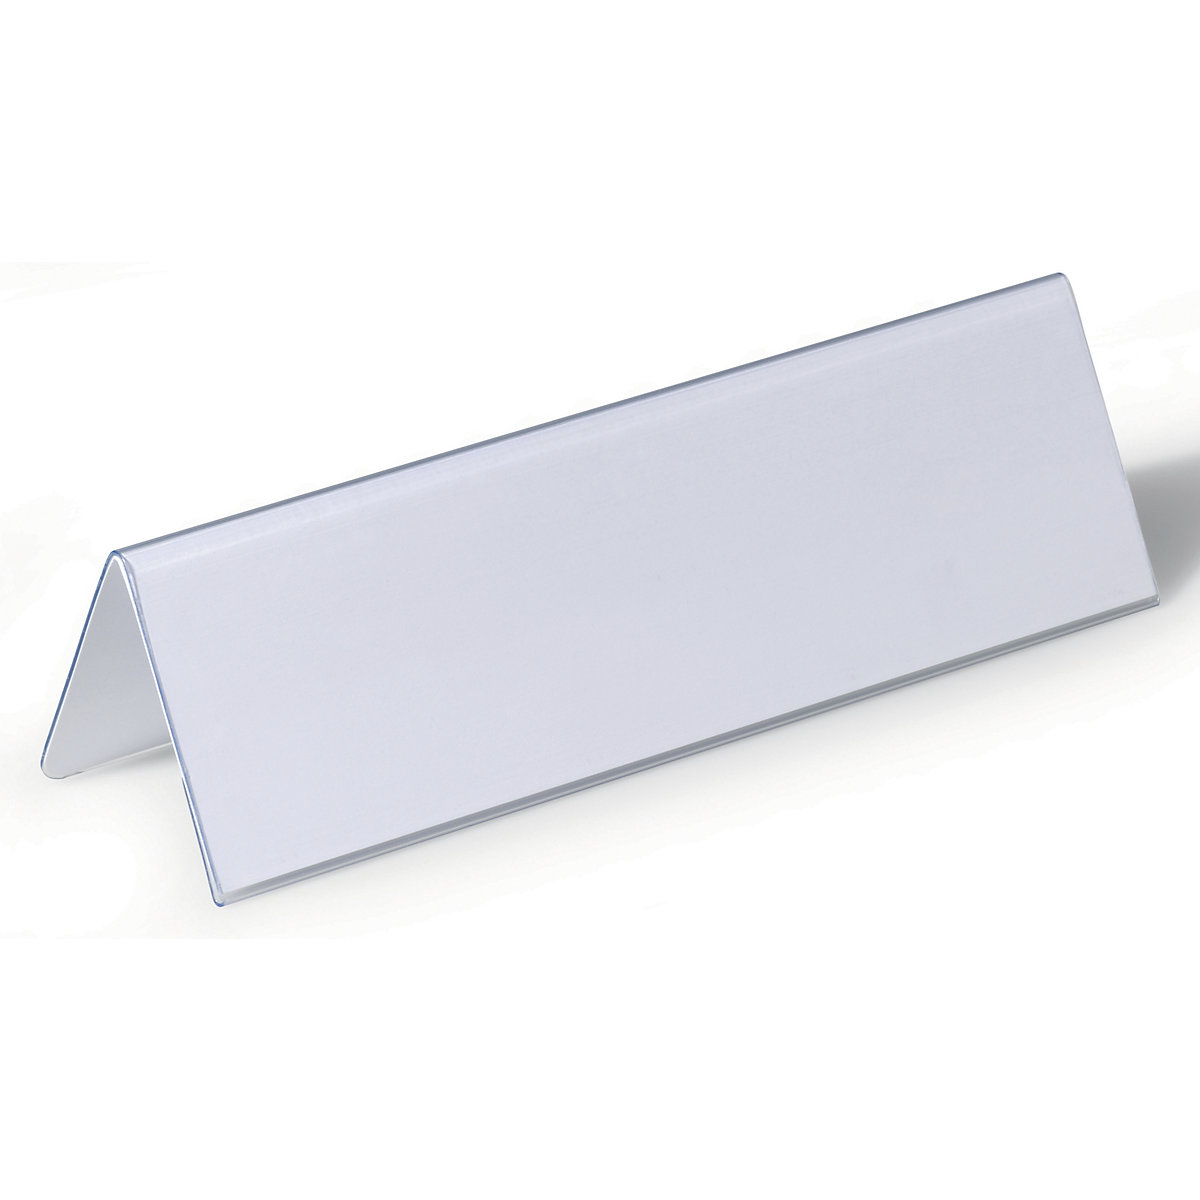 Table place name holder made of hard foil - DURABLE